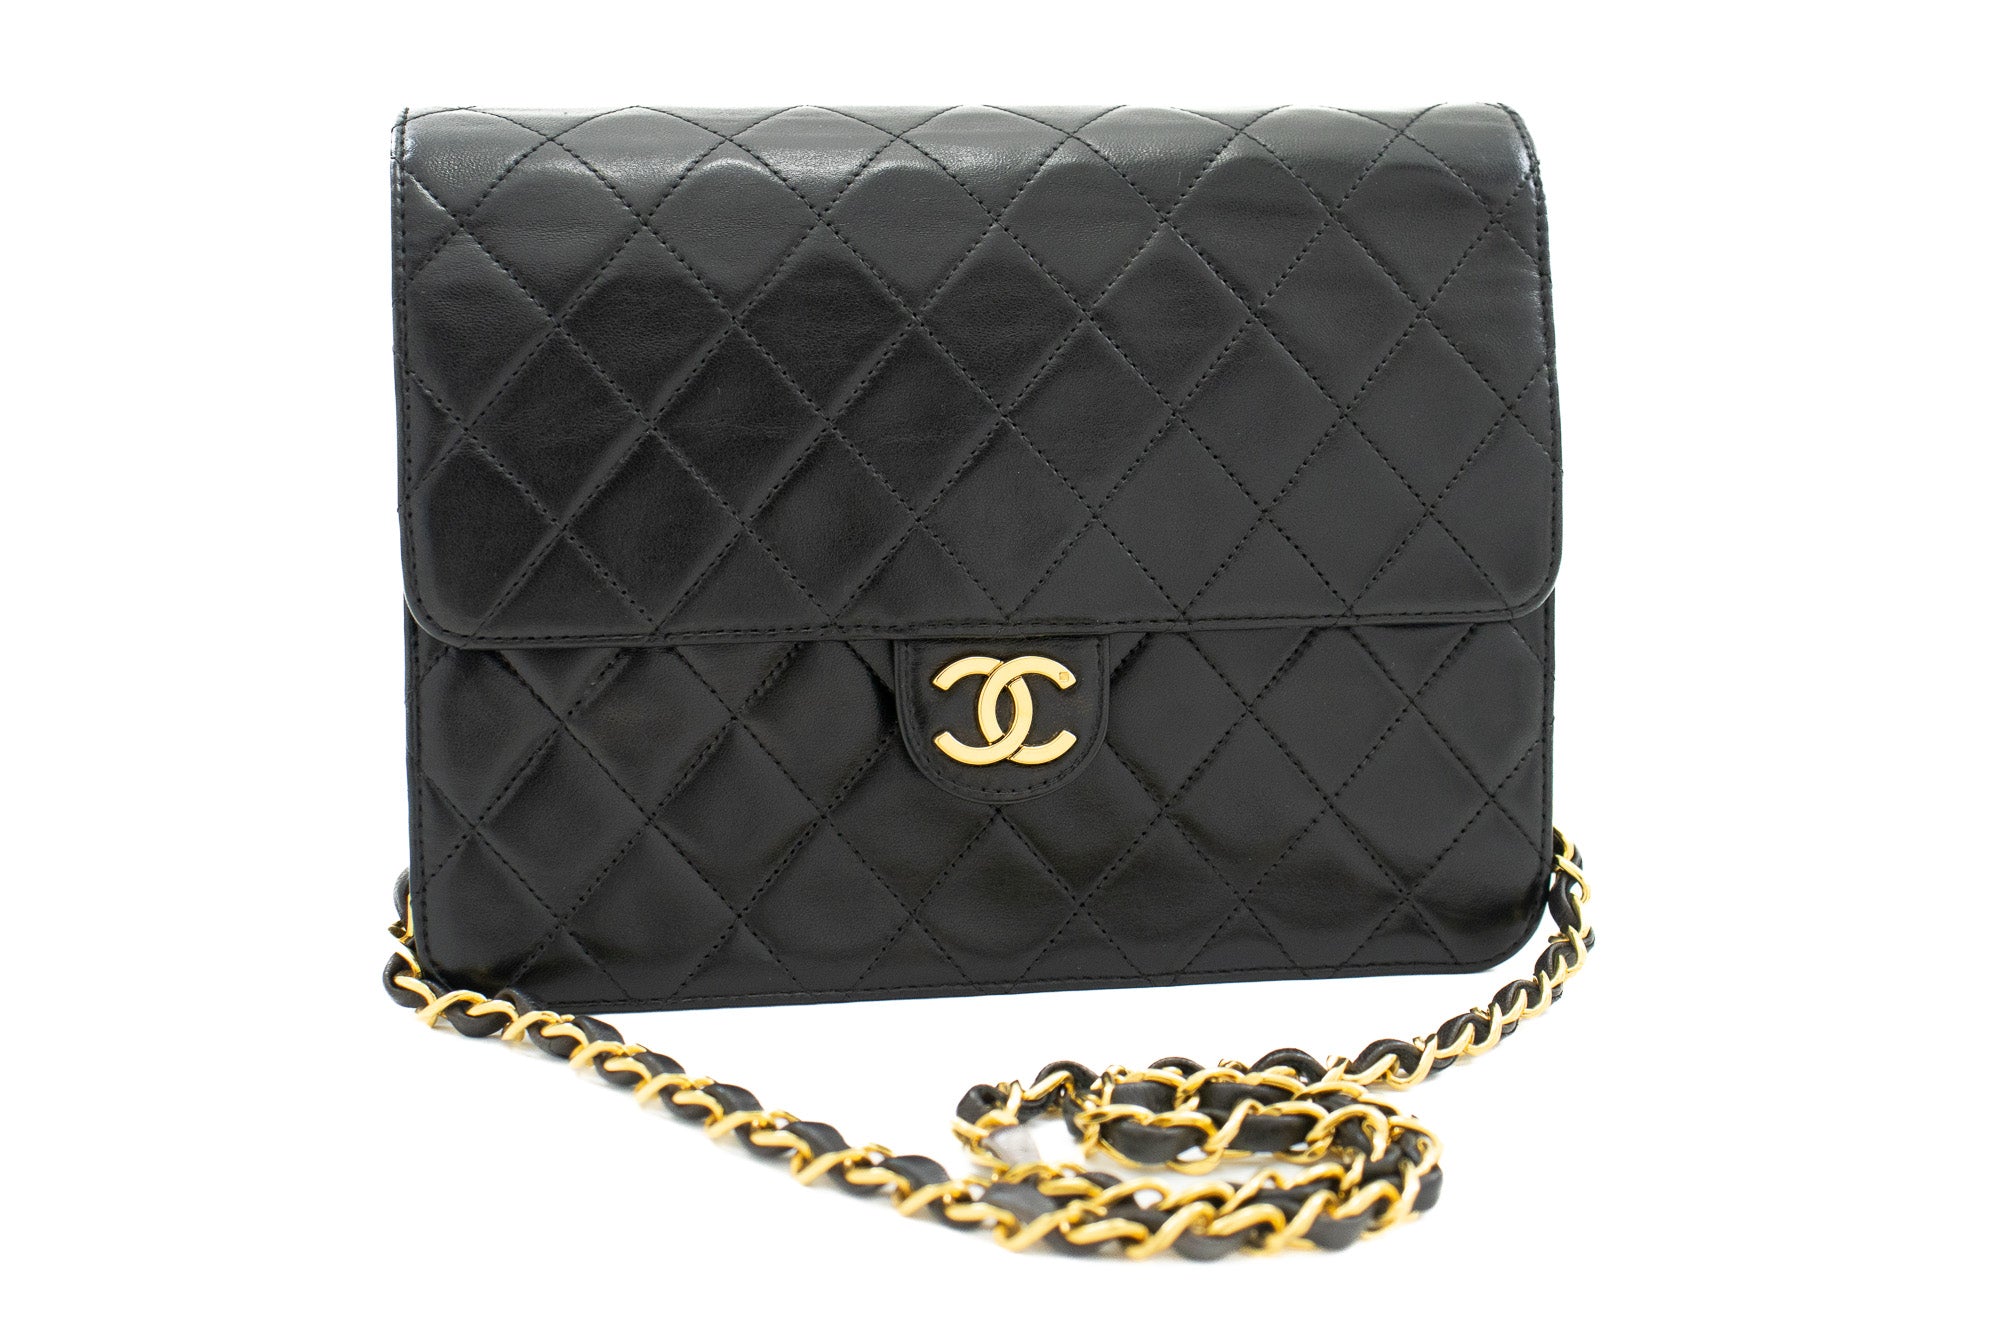 Chanel 2019 Black Lambskin Leather Quilted Mini Rectangular